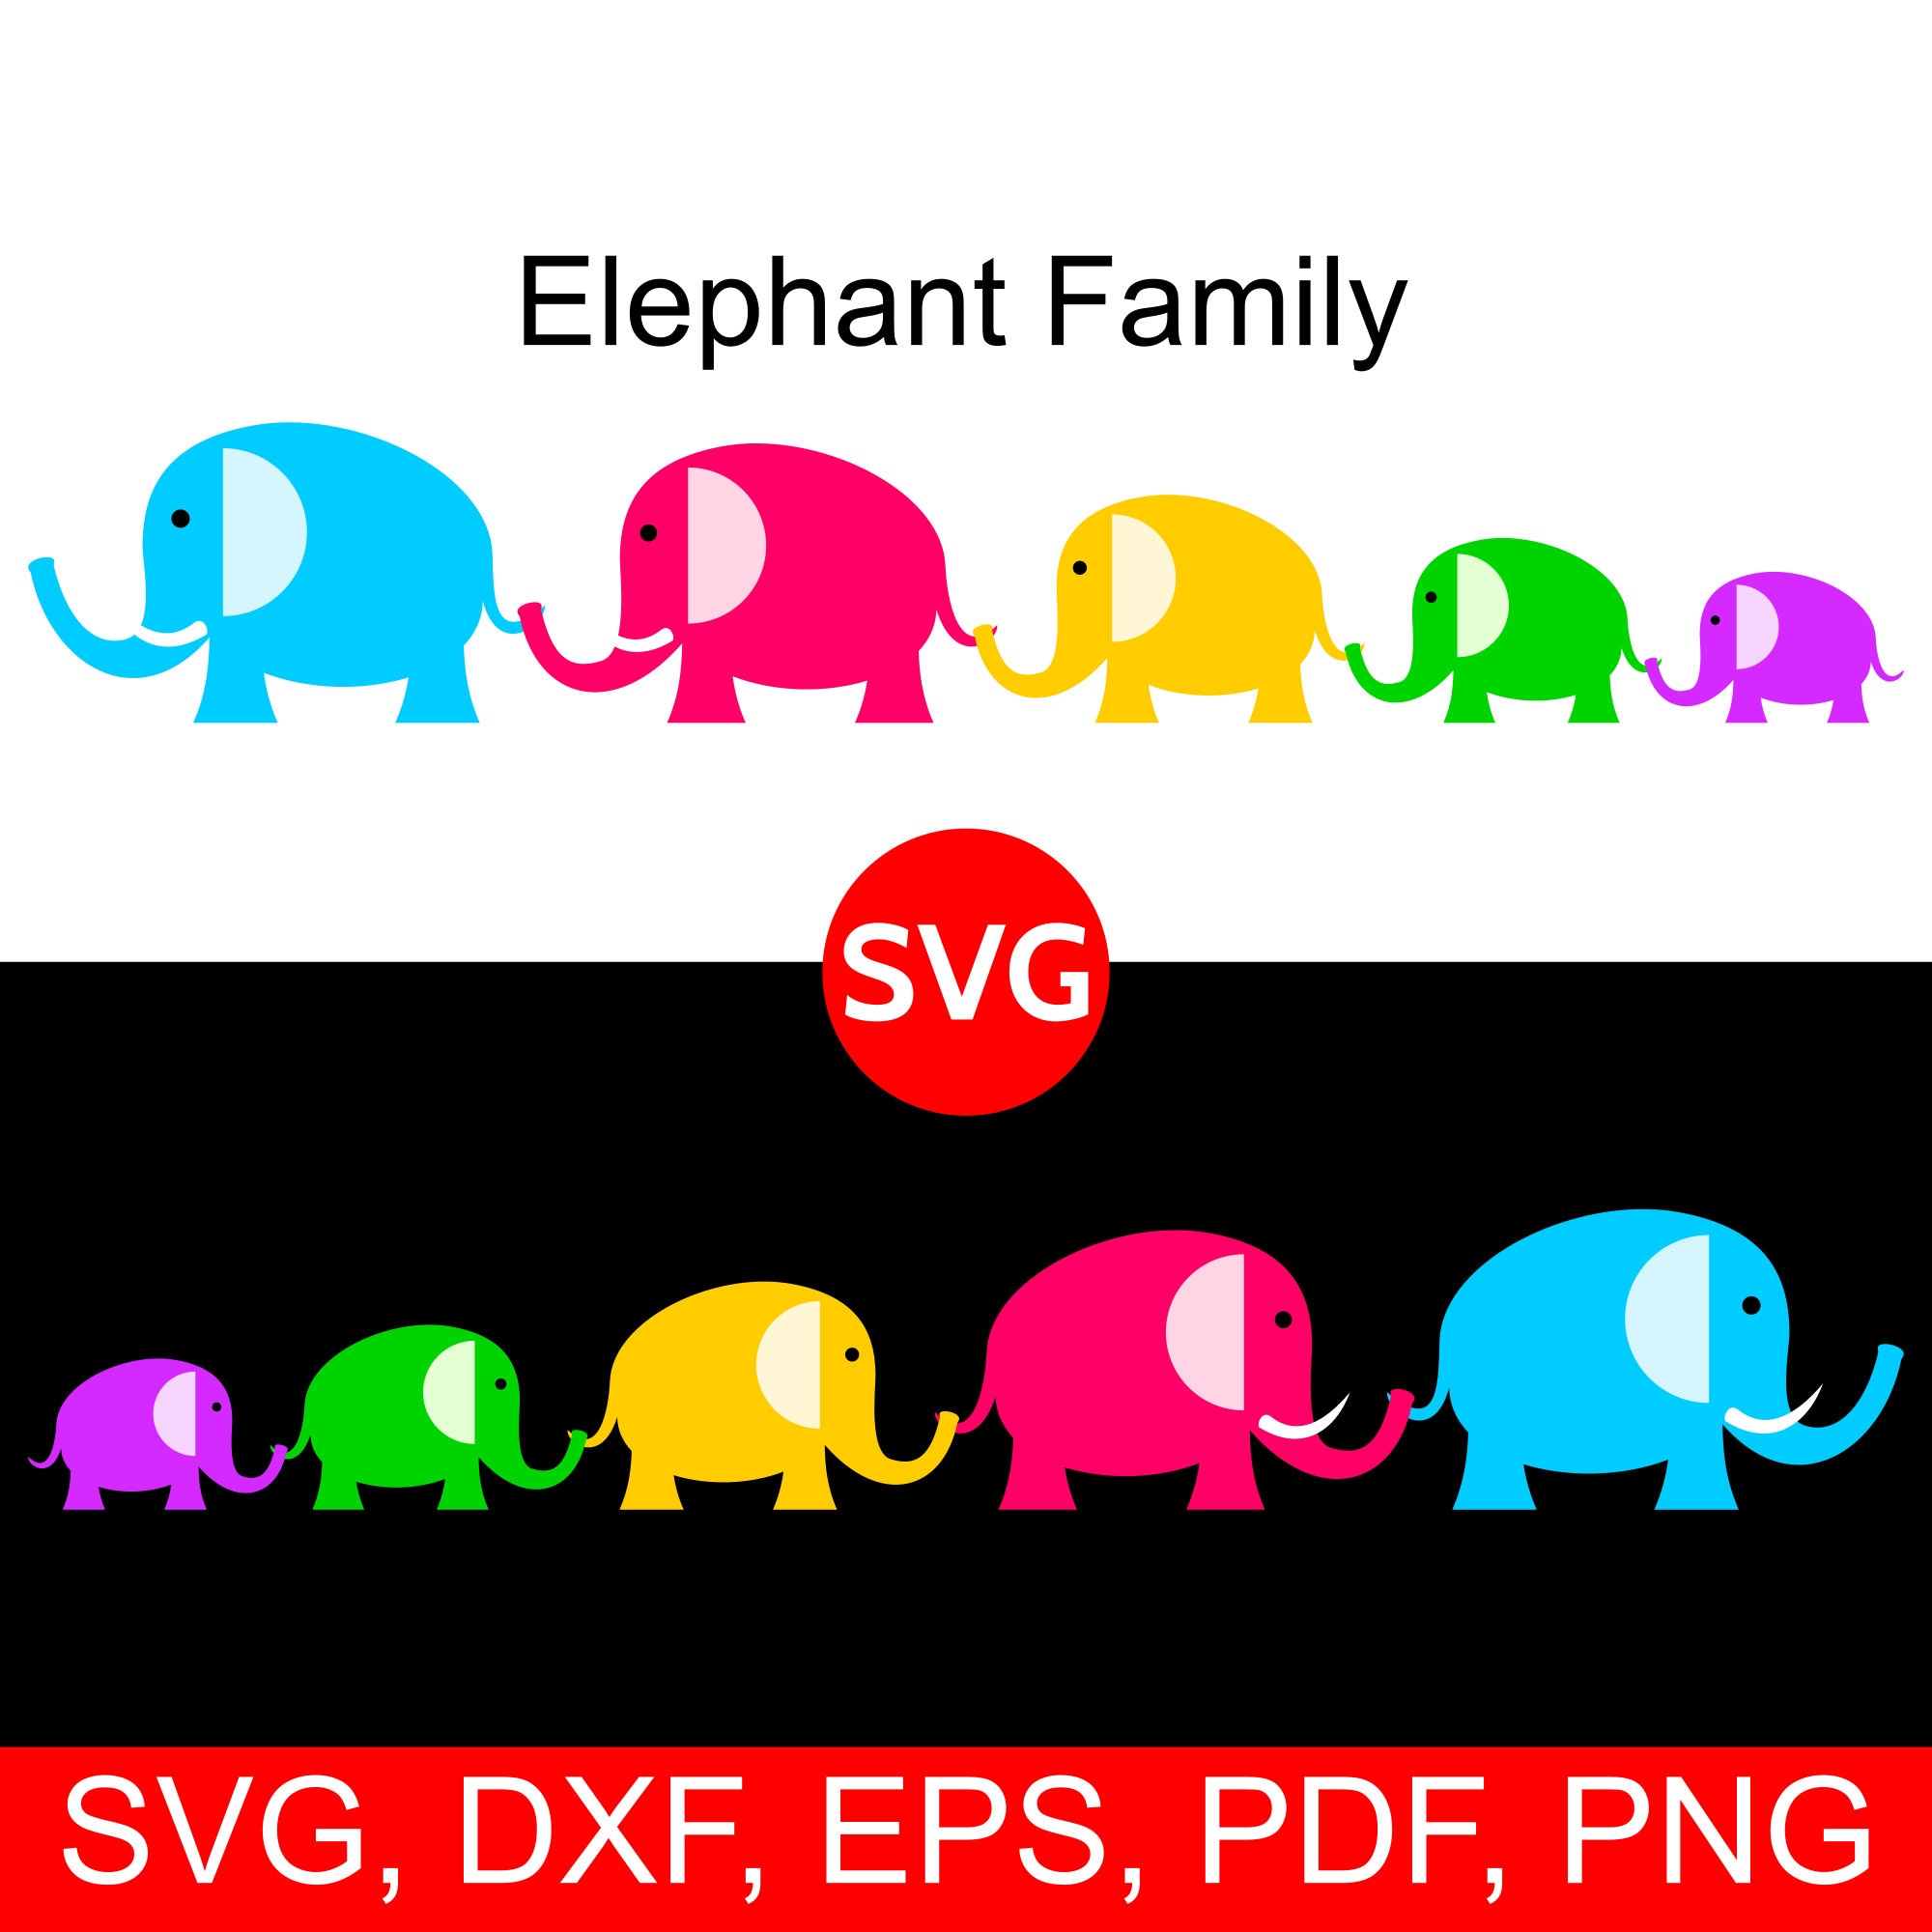 Elephant Family SVG File and printable clipart